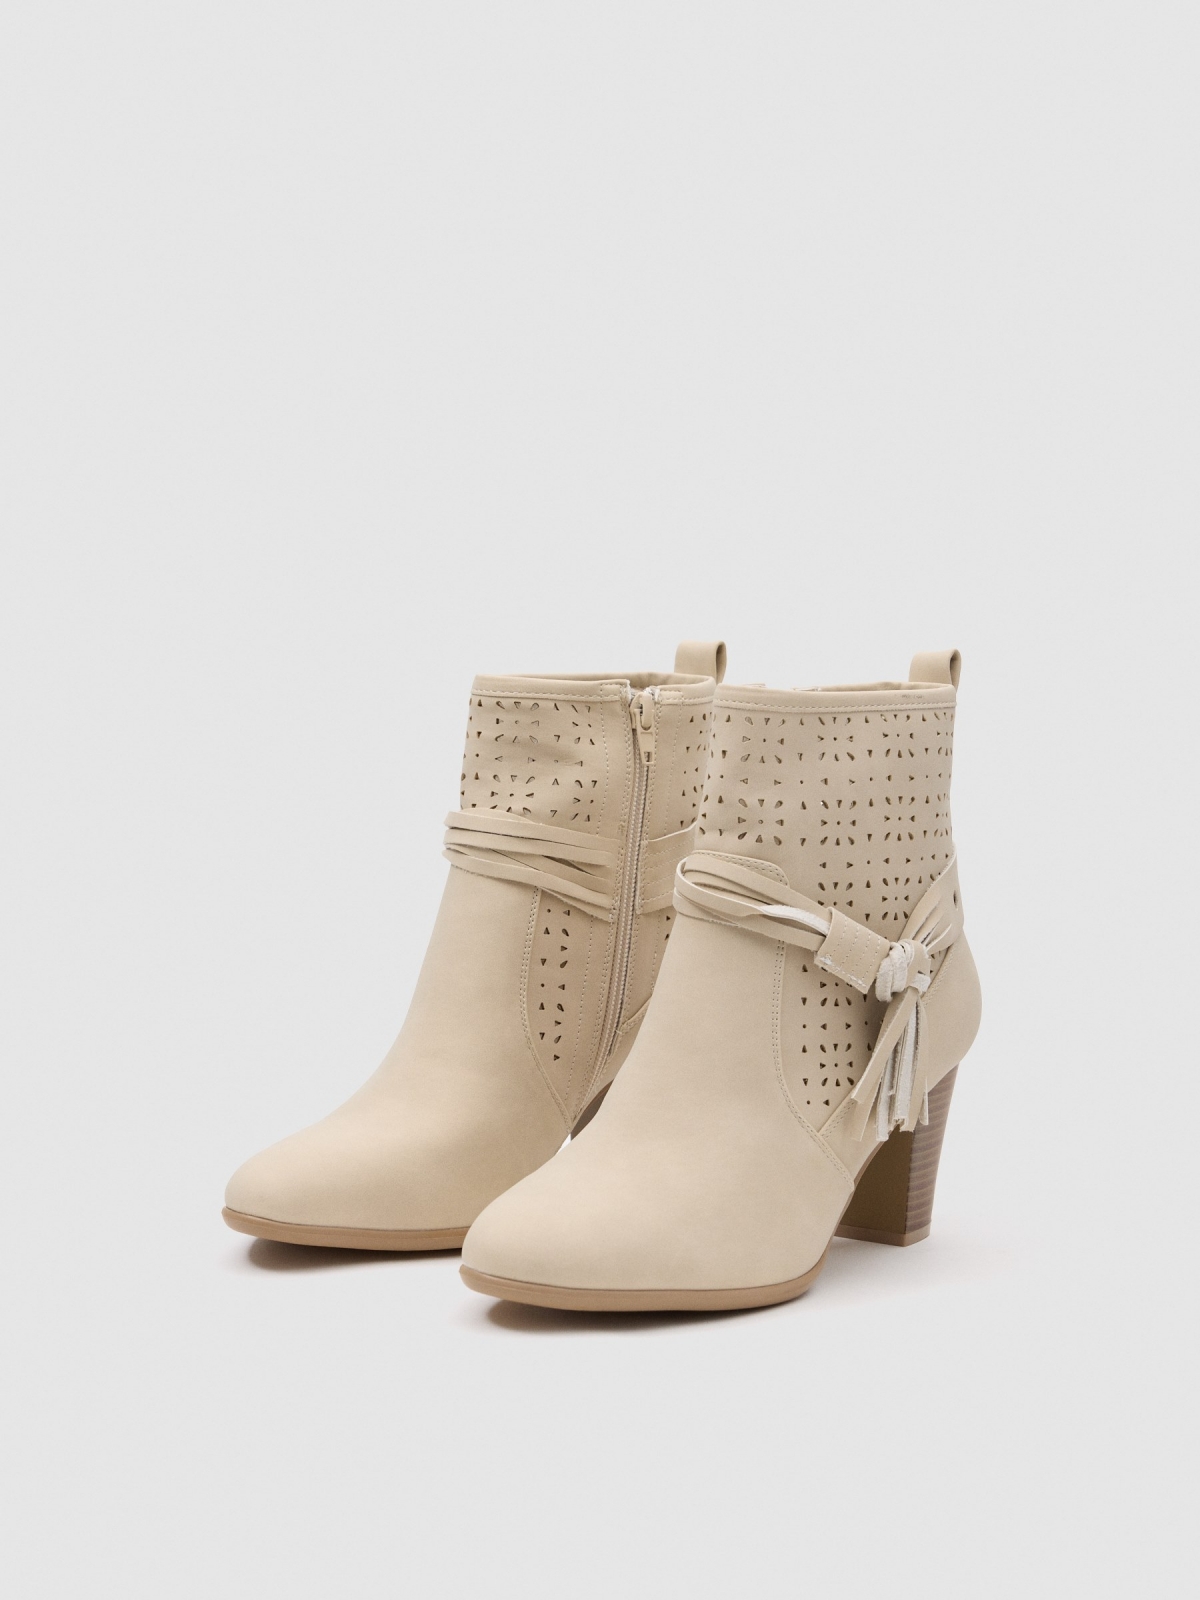 Cream leather-effect medium heel ankle boot with die-cut side bow sand 45º front view